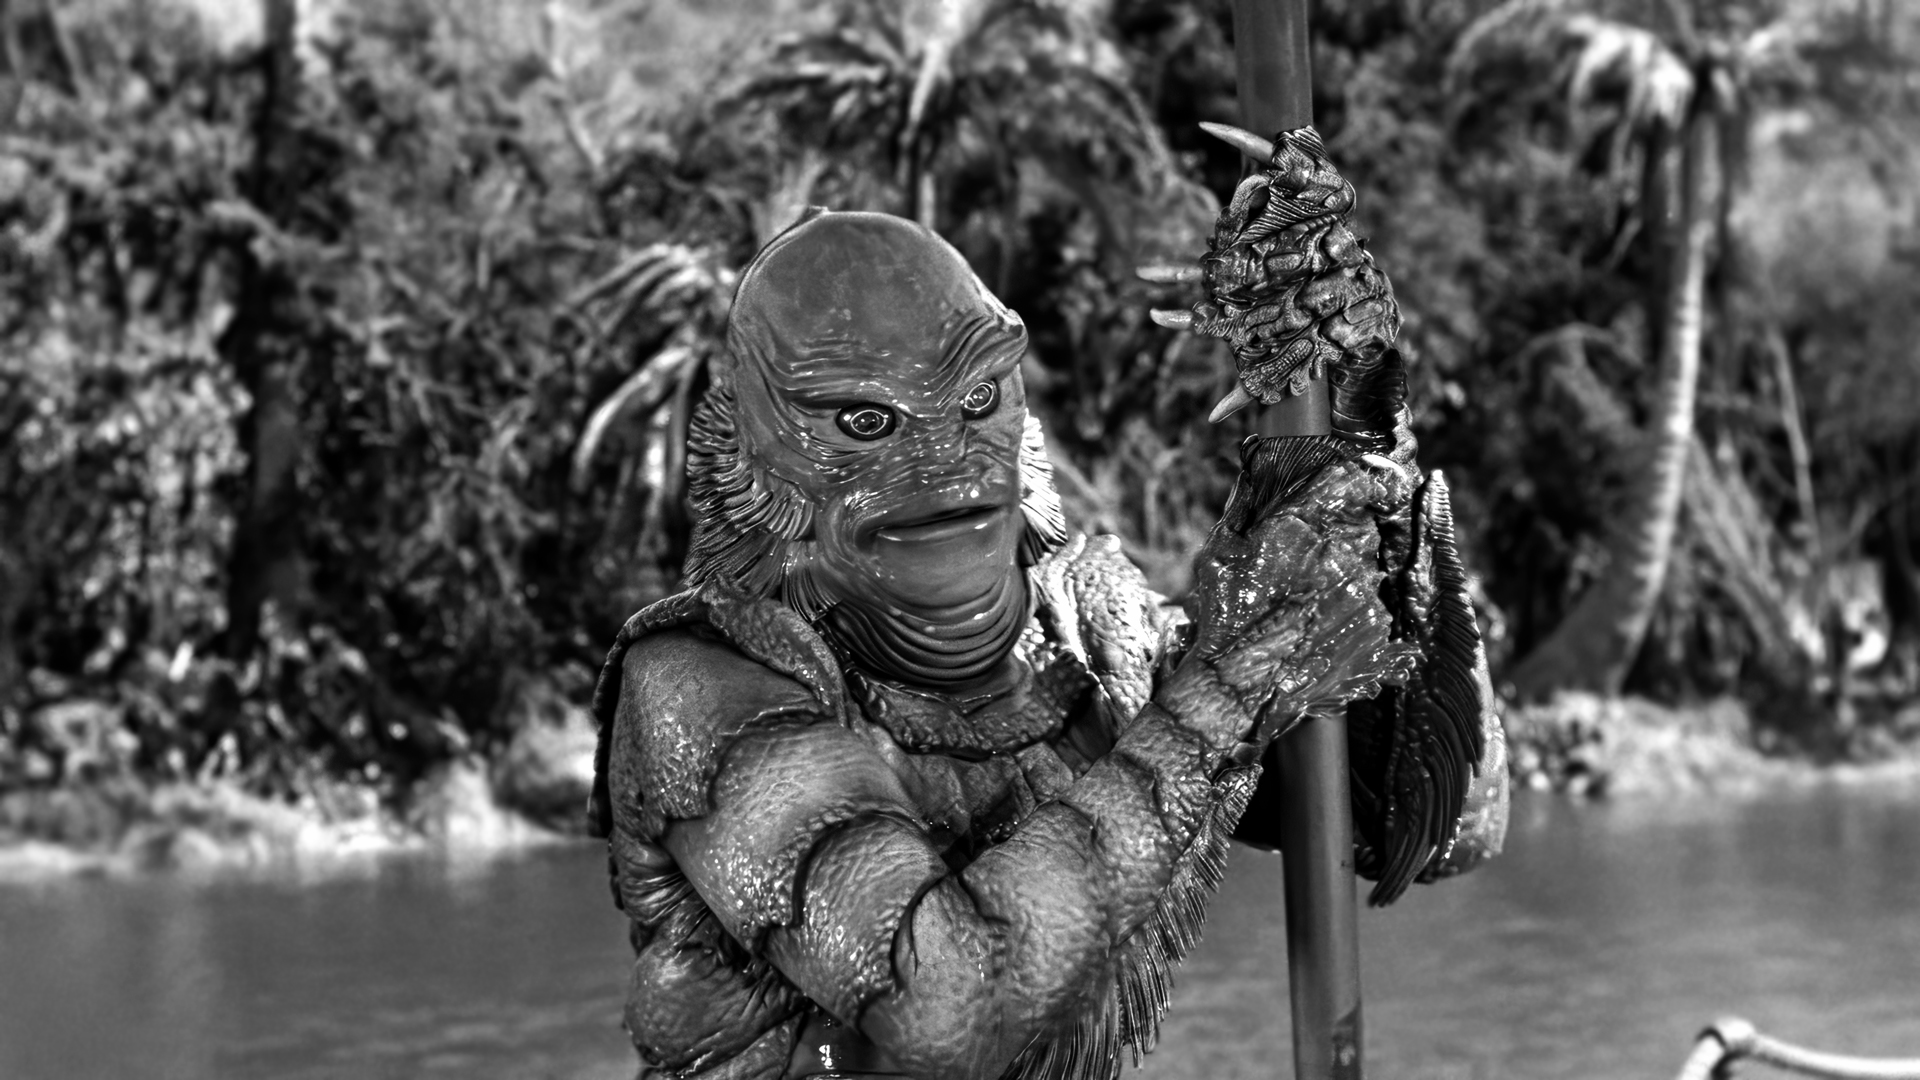 General 1920x1080 Creature from the Black Lagoon movies film stills water creature The Gill-man Horror movies monochrome